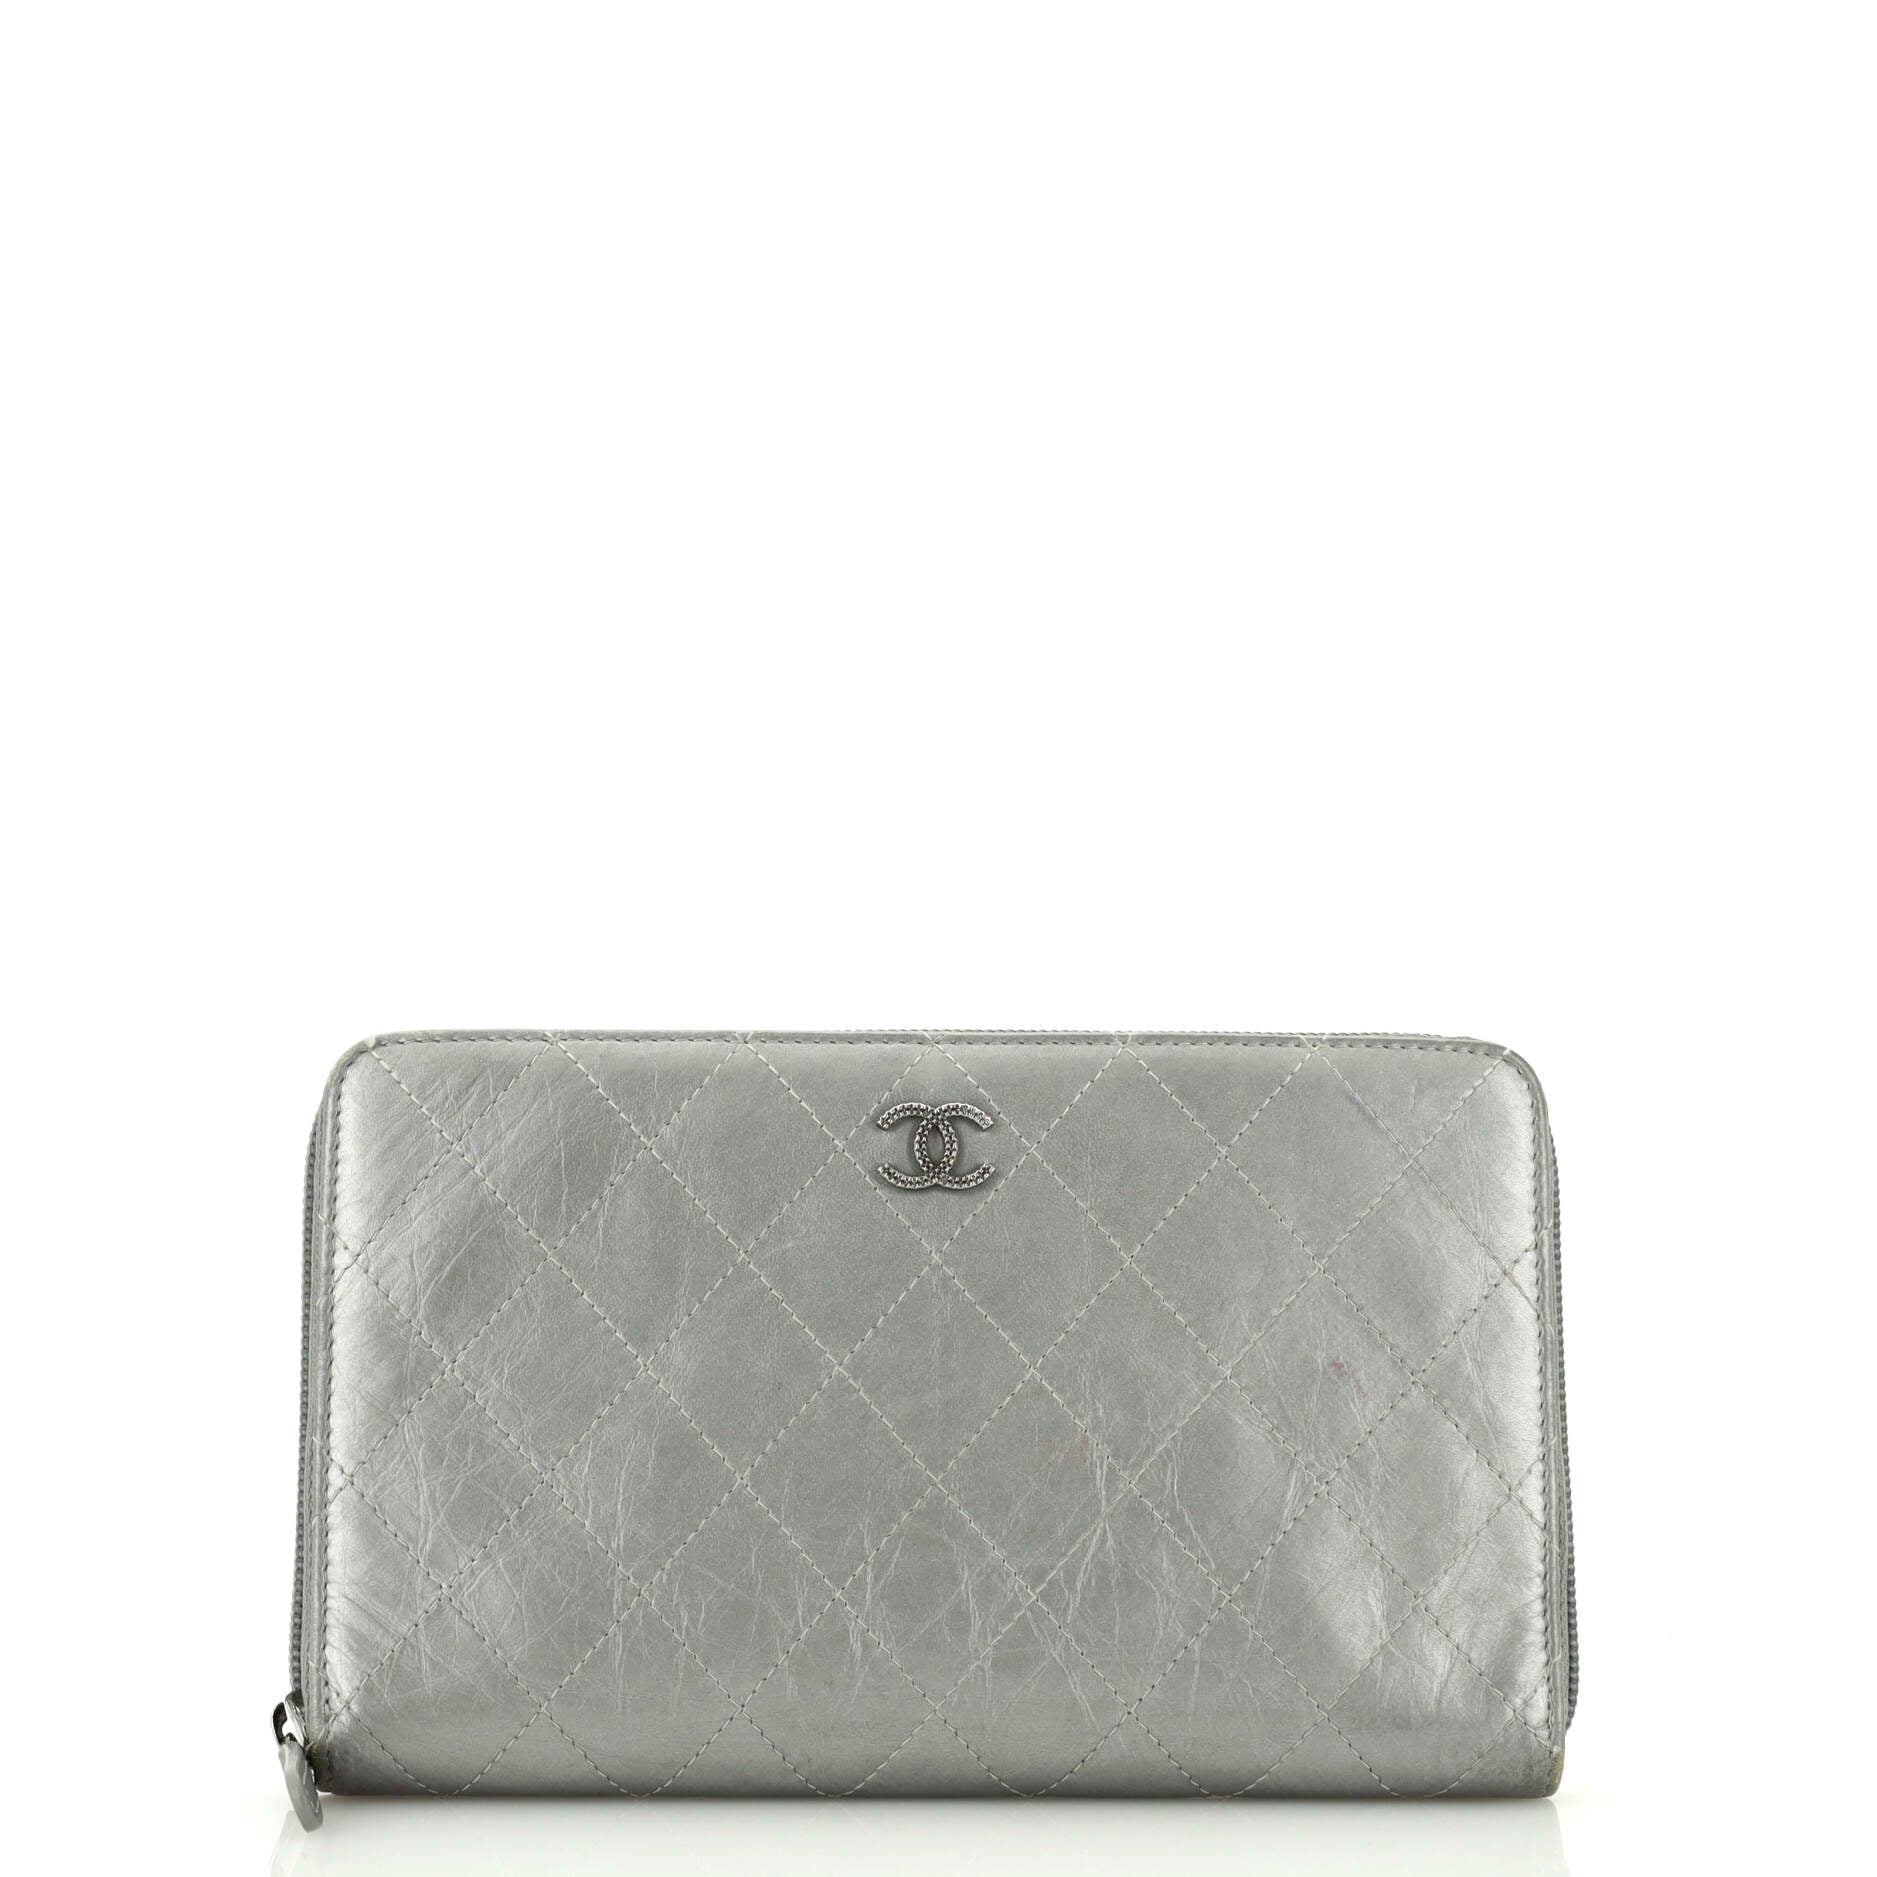 CHANEL Vintage Timeless Bifold Wallet Caviar Compact